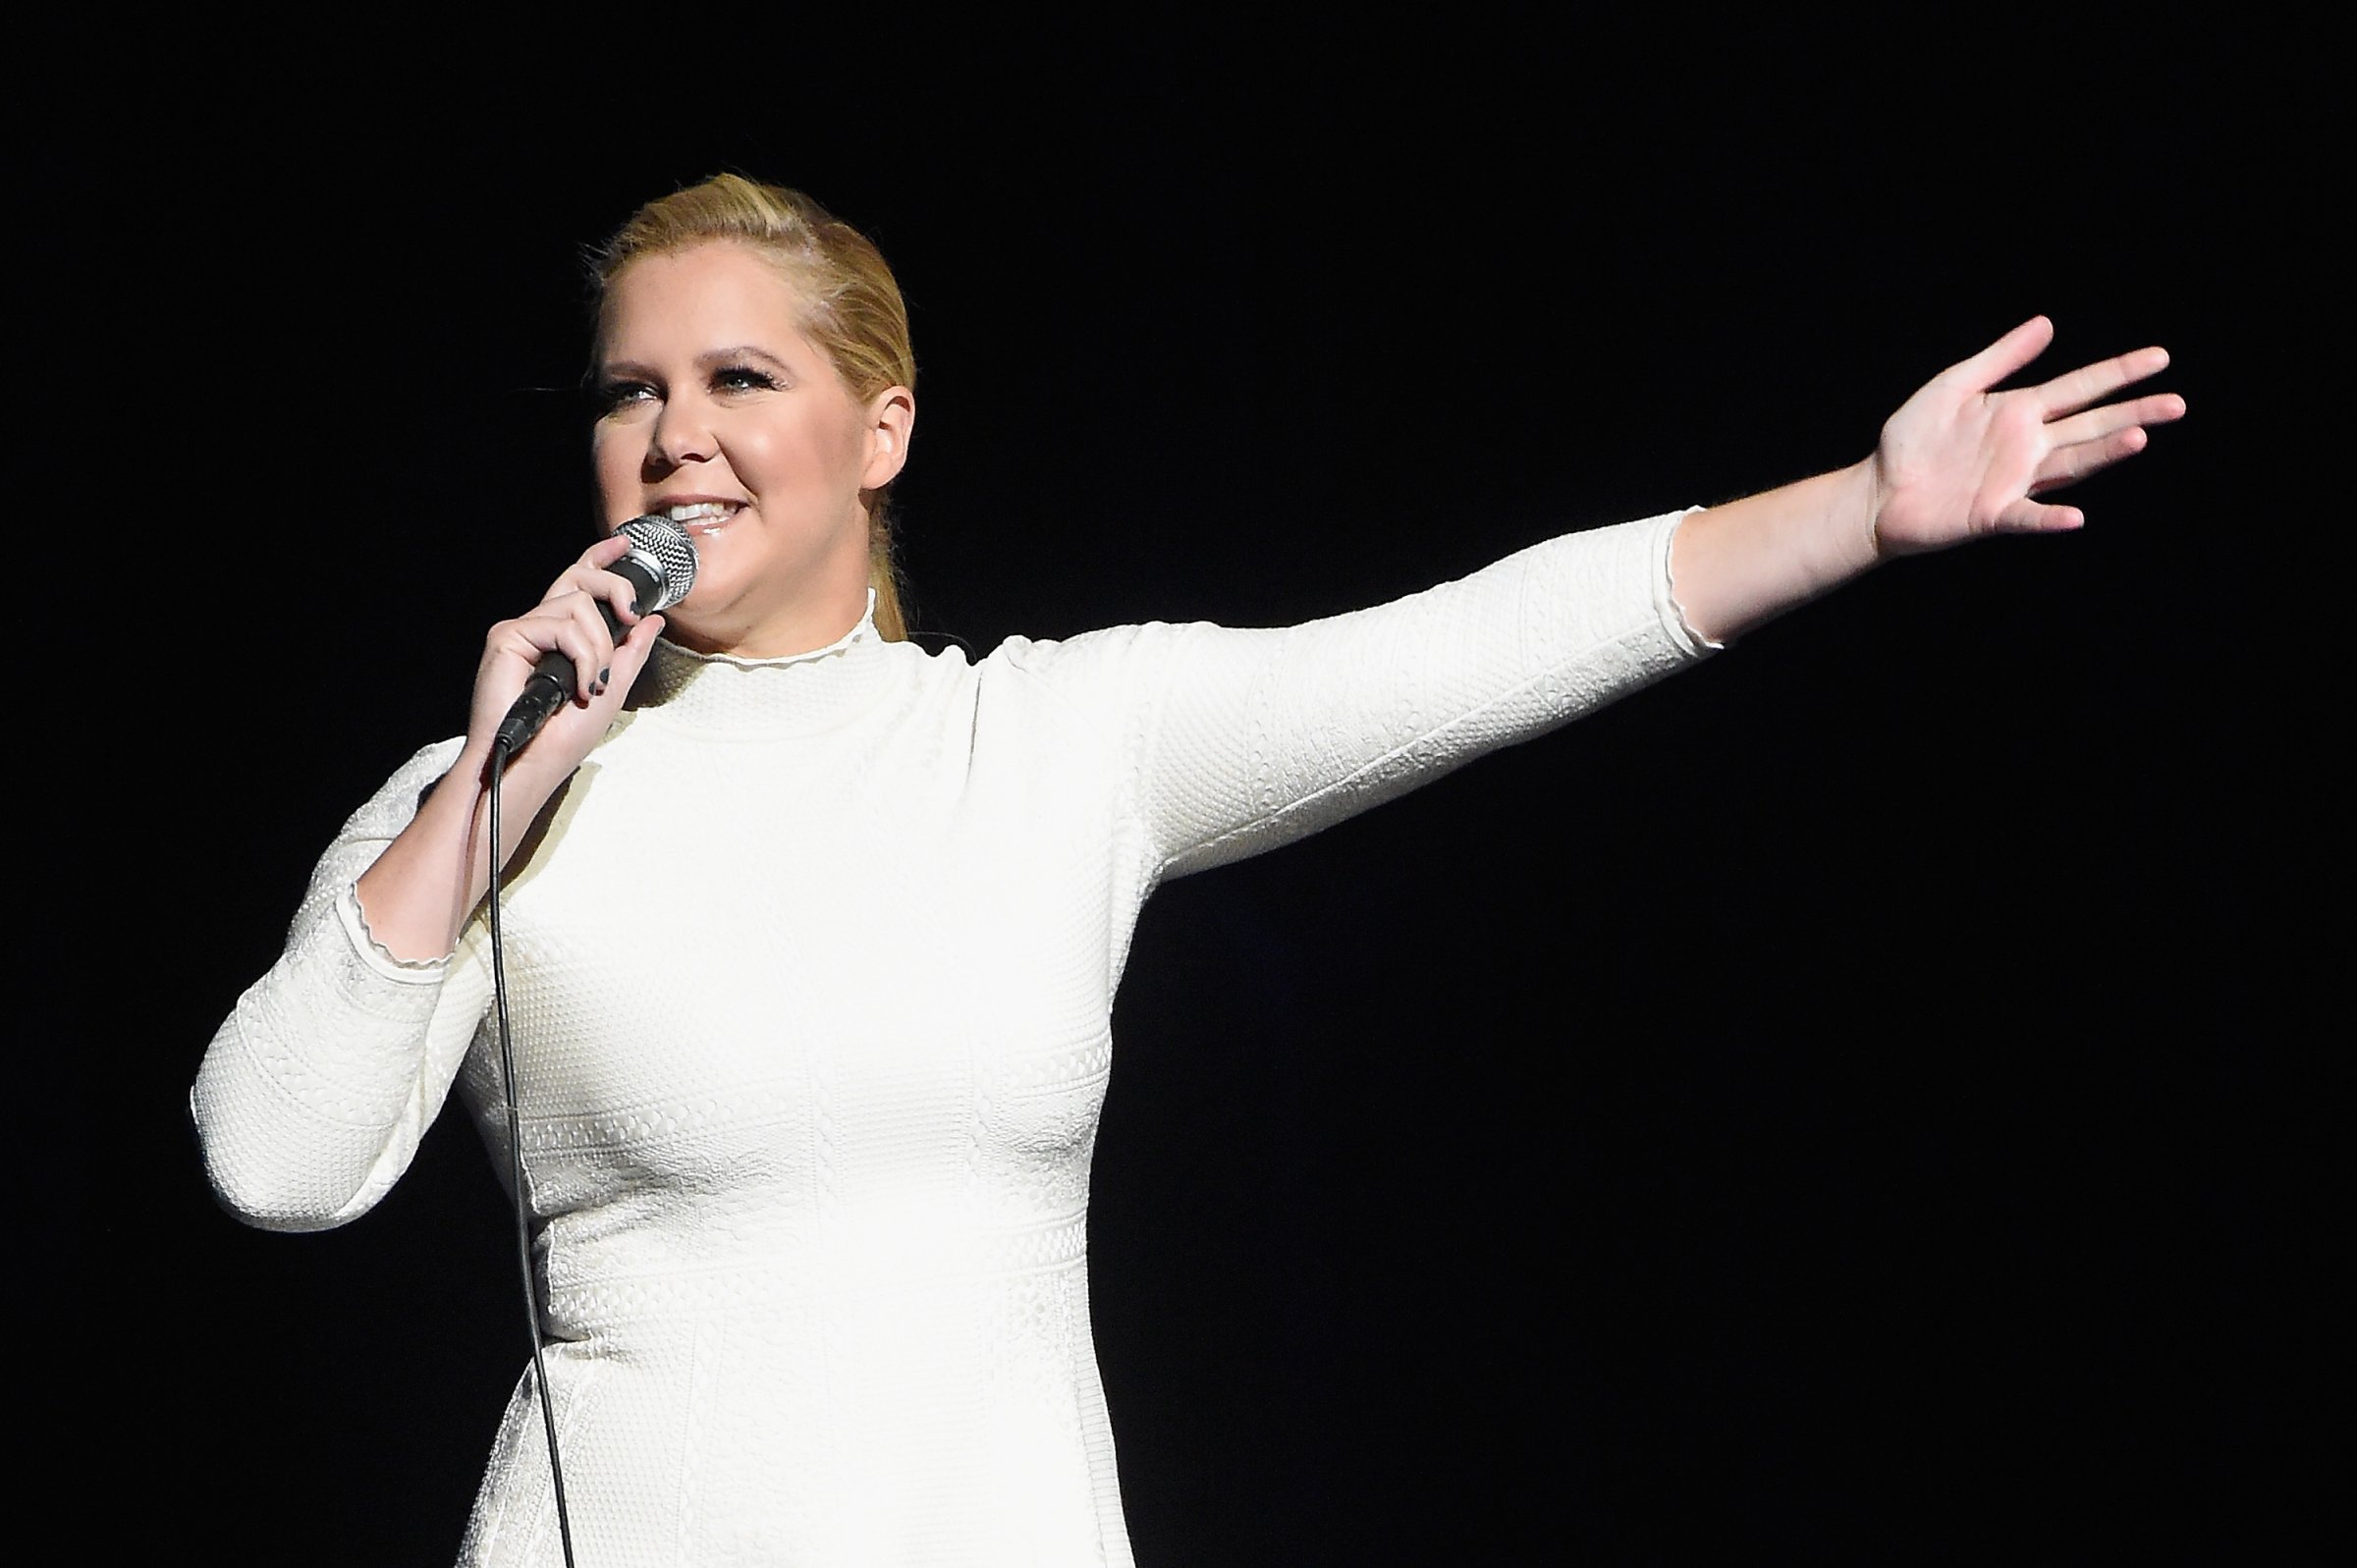 Amy Schumer attends "An Evening with Jerry Seinfeld and Amy Schumer" at Beacon Theatre in New York City on Nov. 16, 2015.